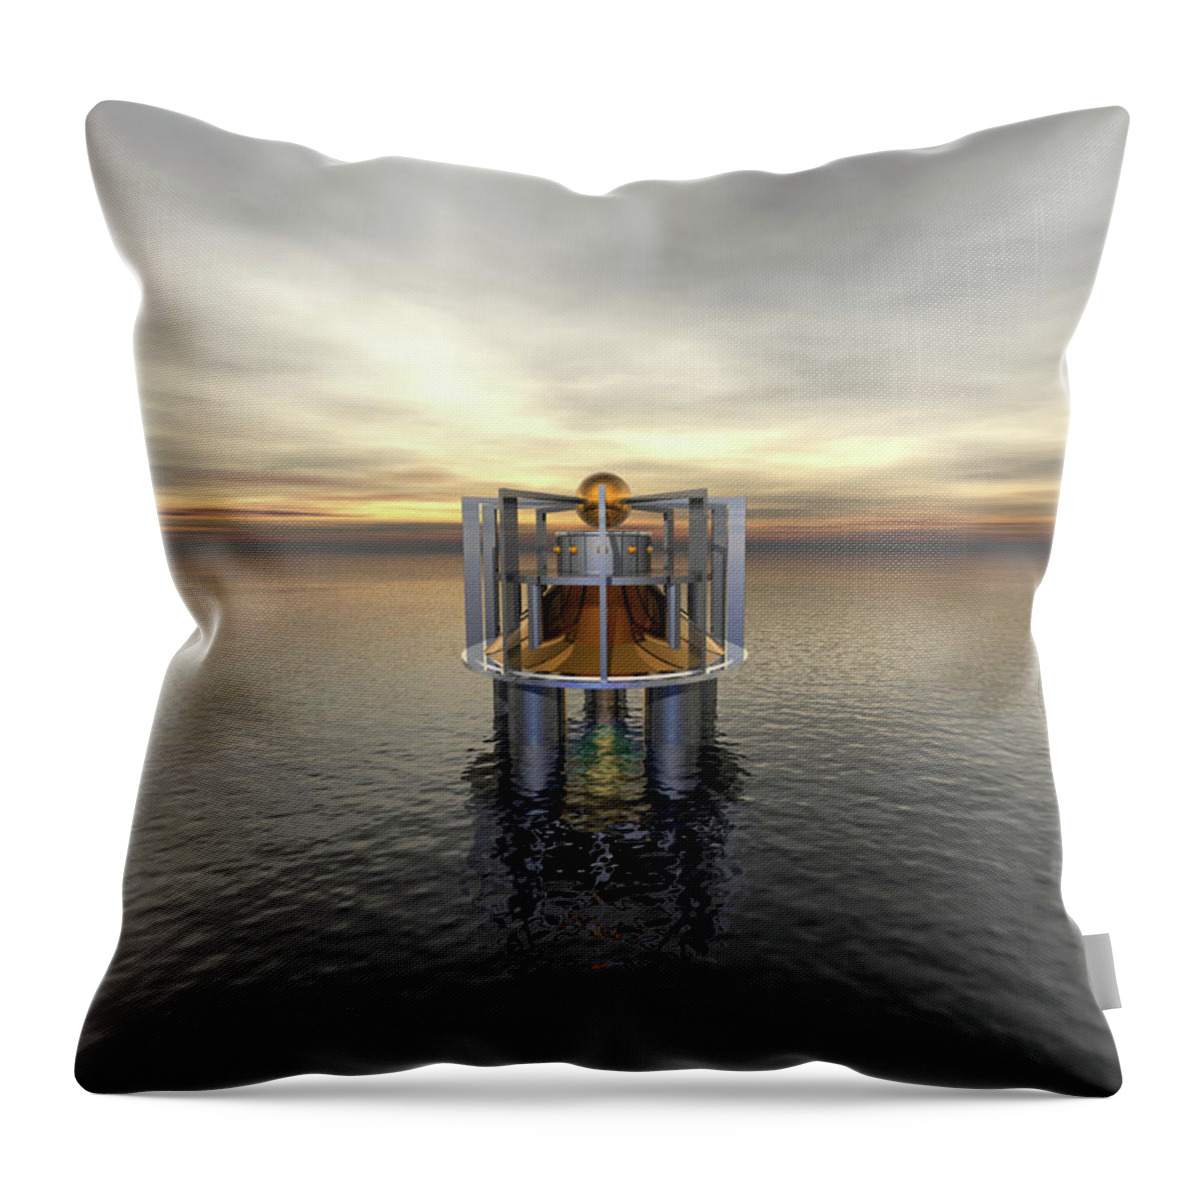 Machine Throw Pillow featuring the digital art Mysterious Machine by Phil Perkins